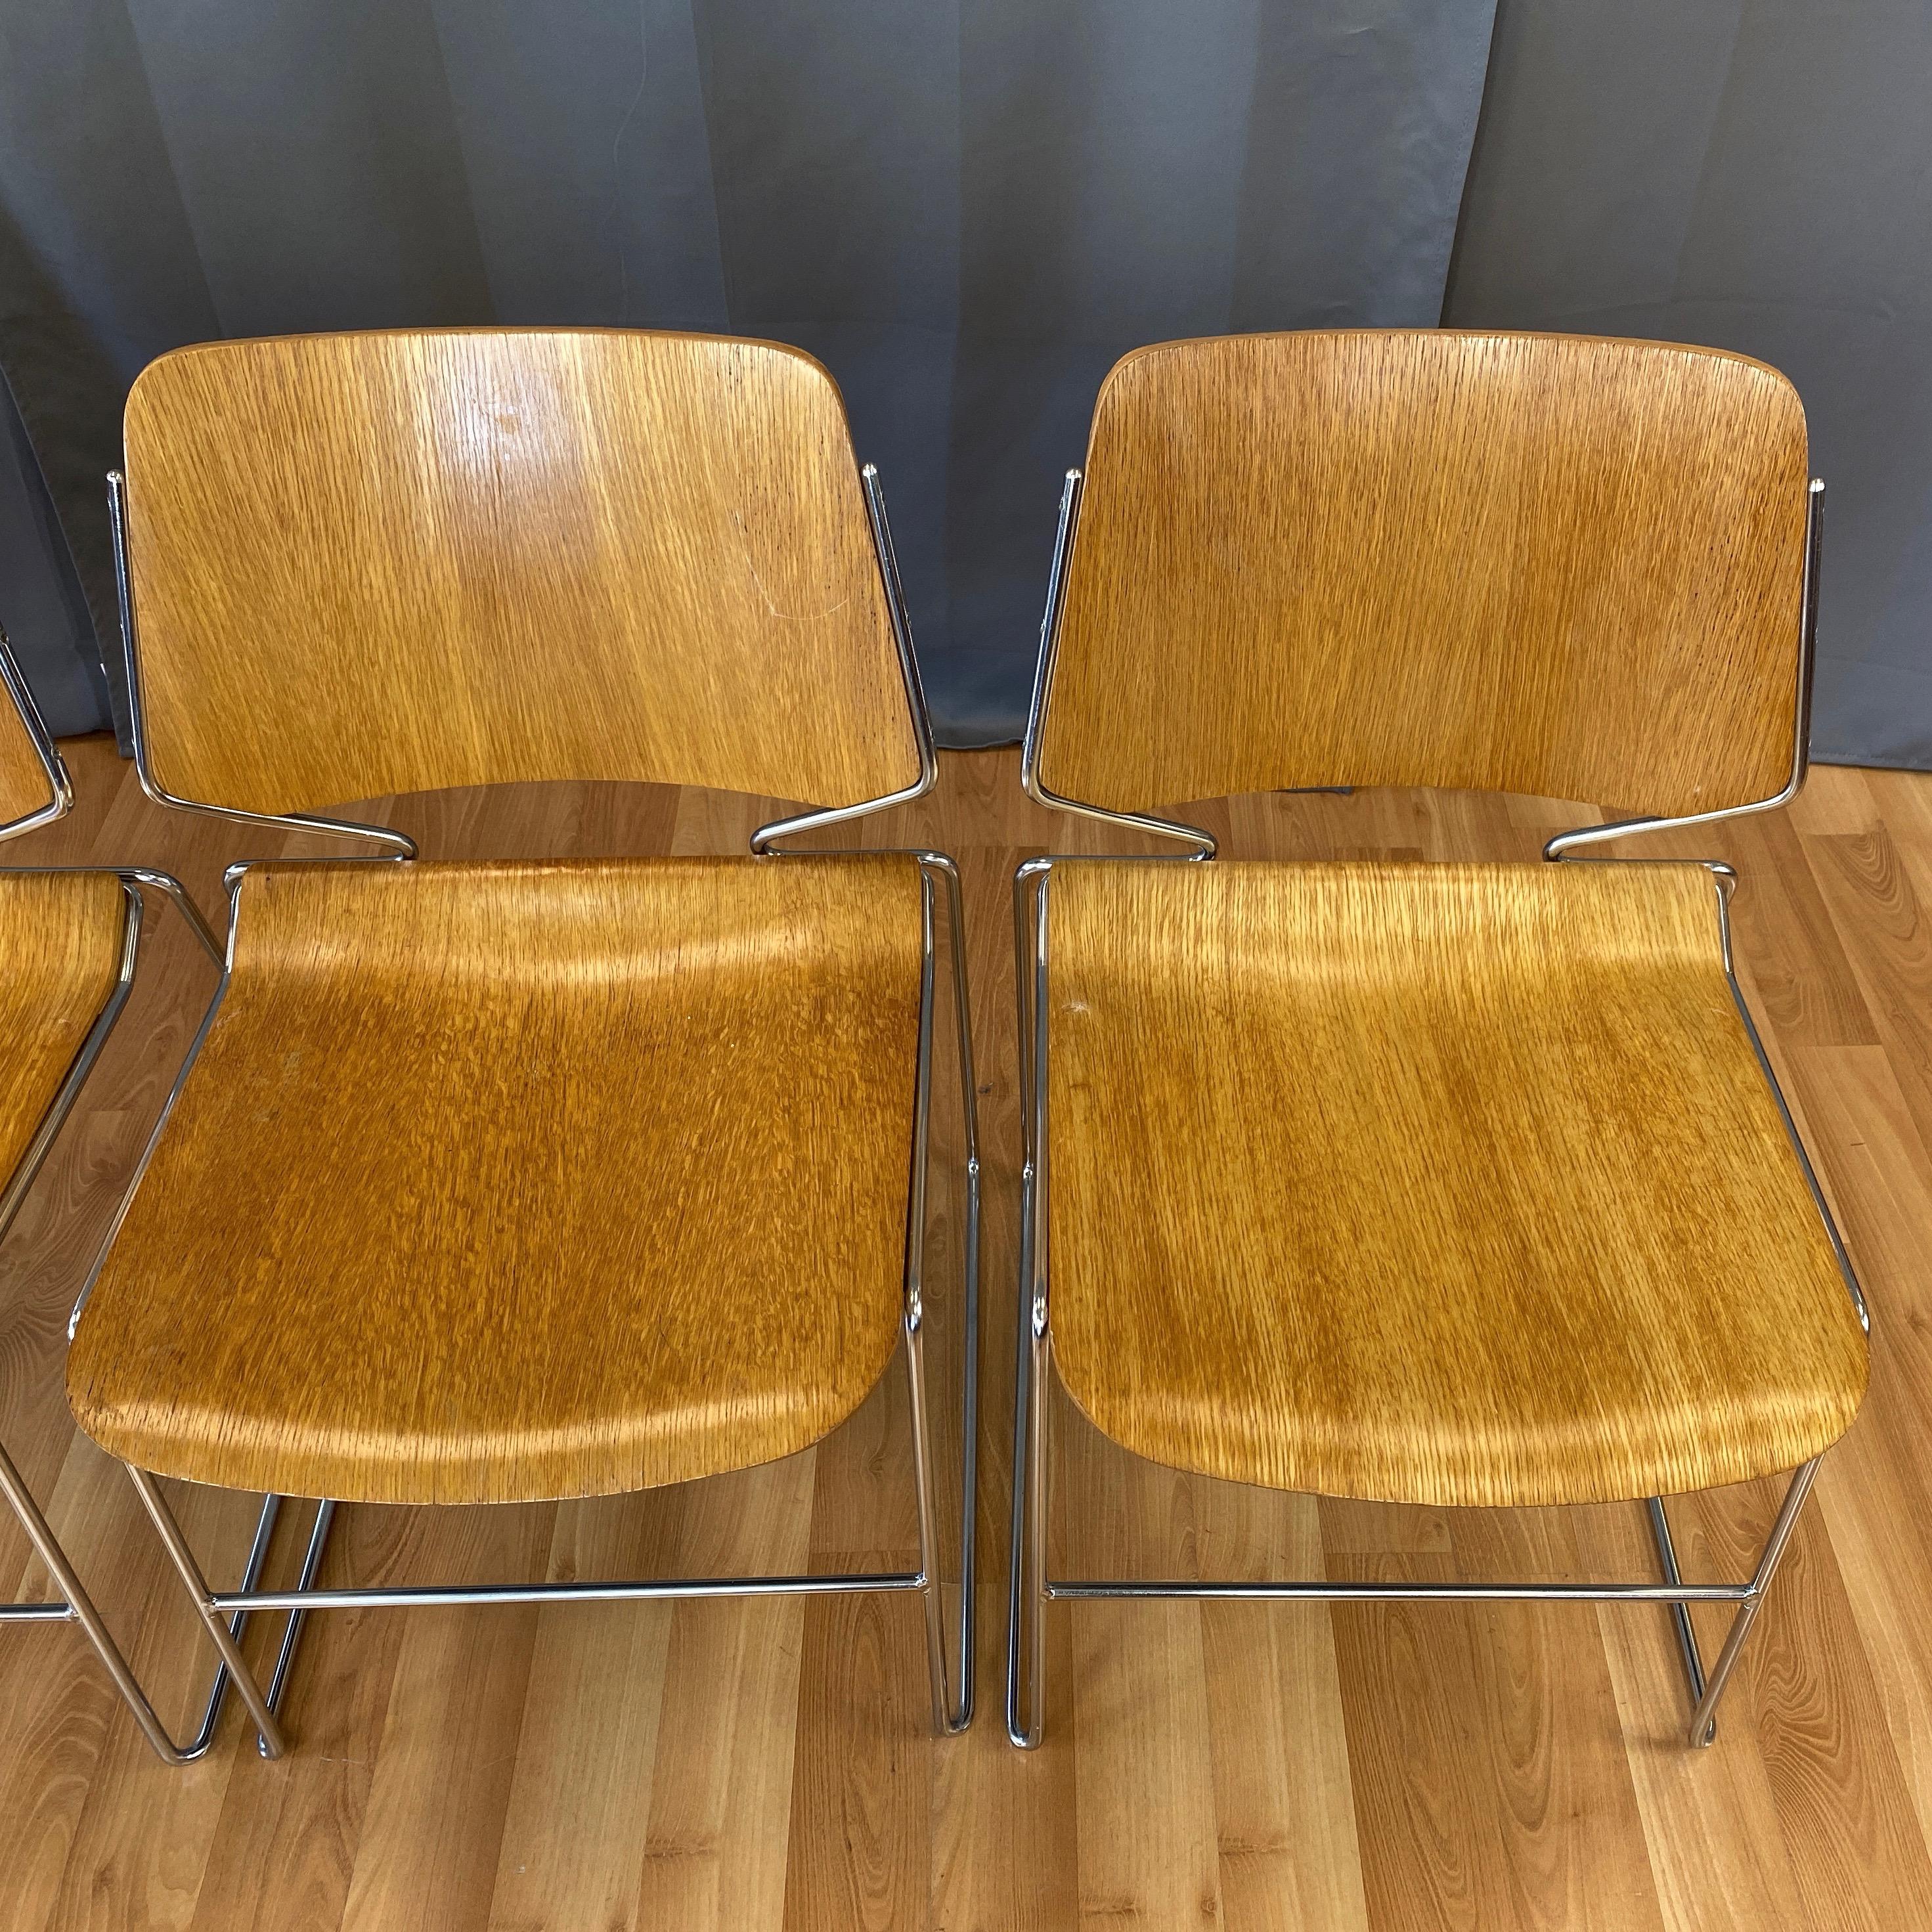 Chrome David Rowland Oak 40/4 Stacking Chairs and Unusual Table, Five-Piece Set